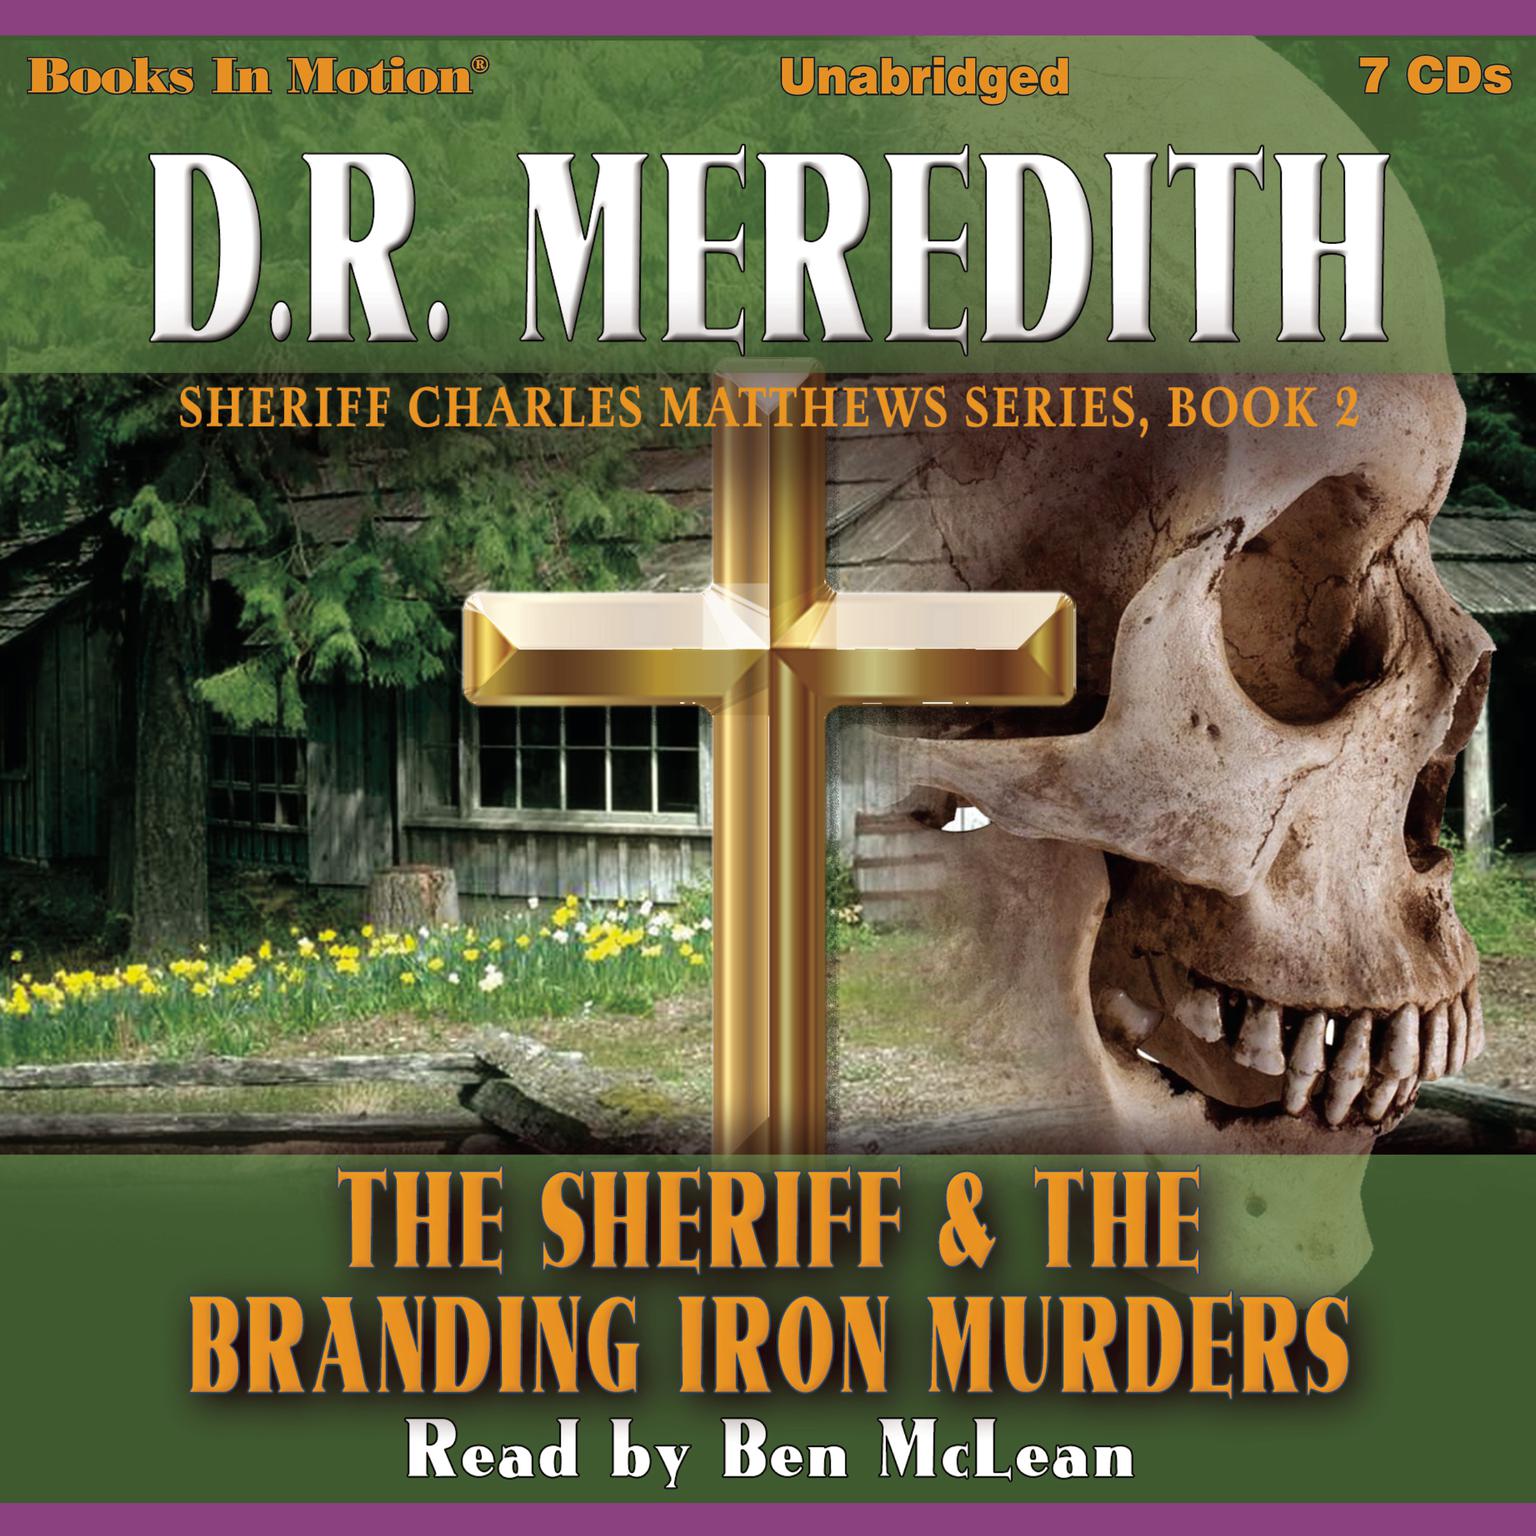 The Sheriff and the Branding Iron Murders: (Sheriff Charles Matthews Series, Book 2)  Audiobook, by D.R. Meredith